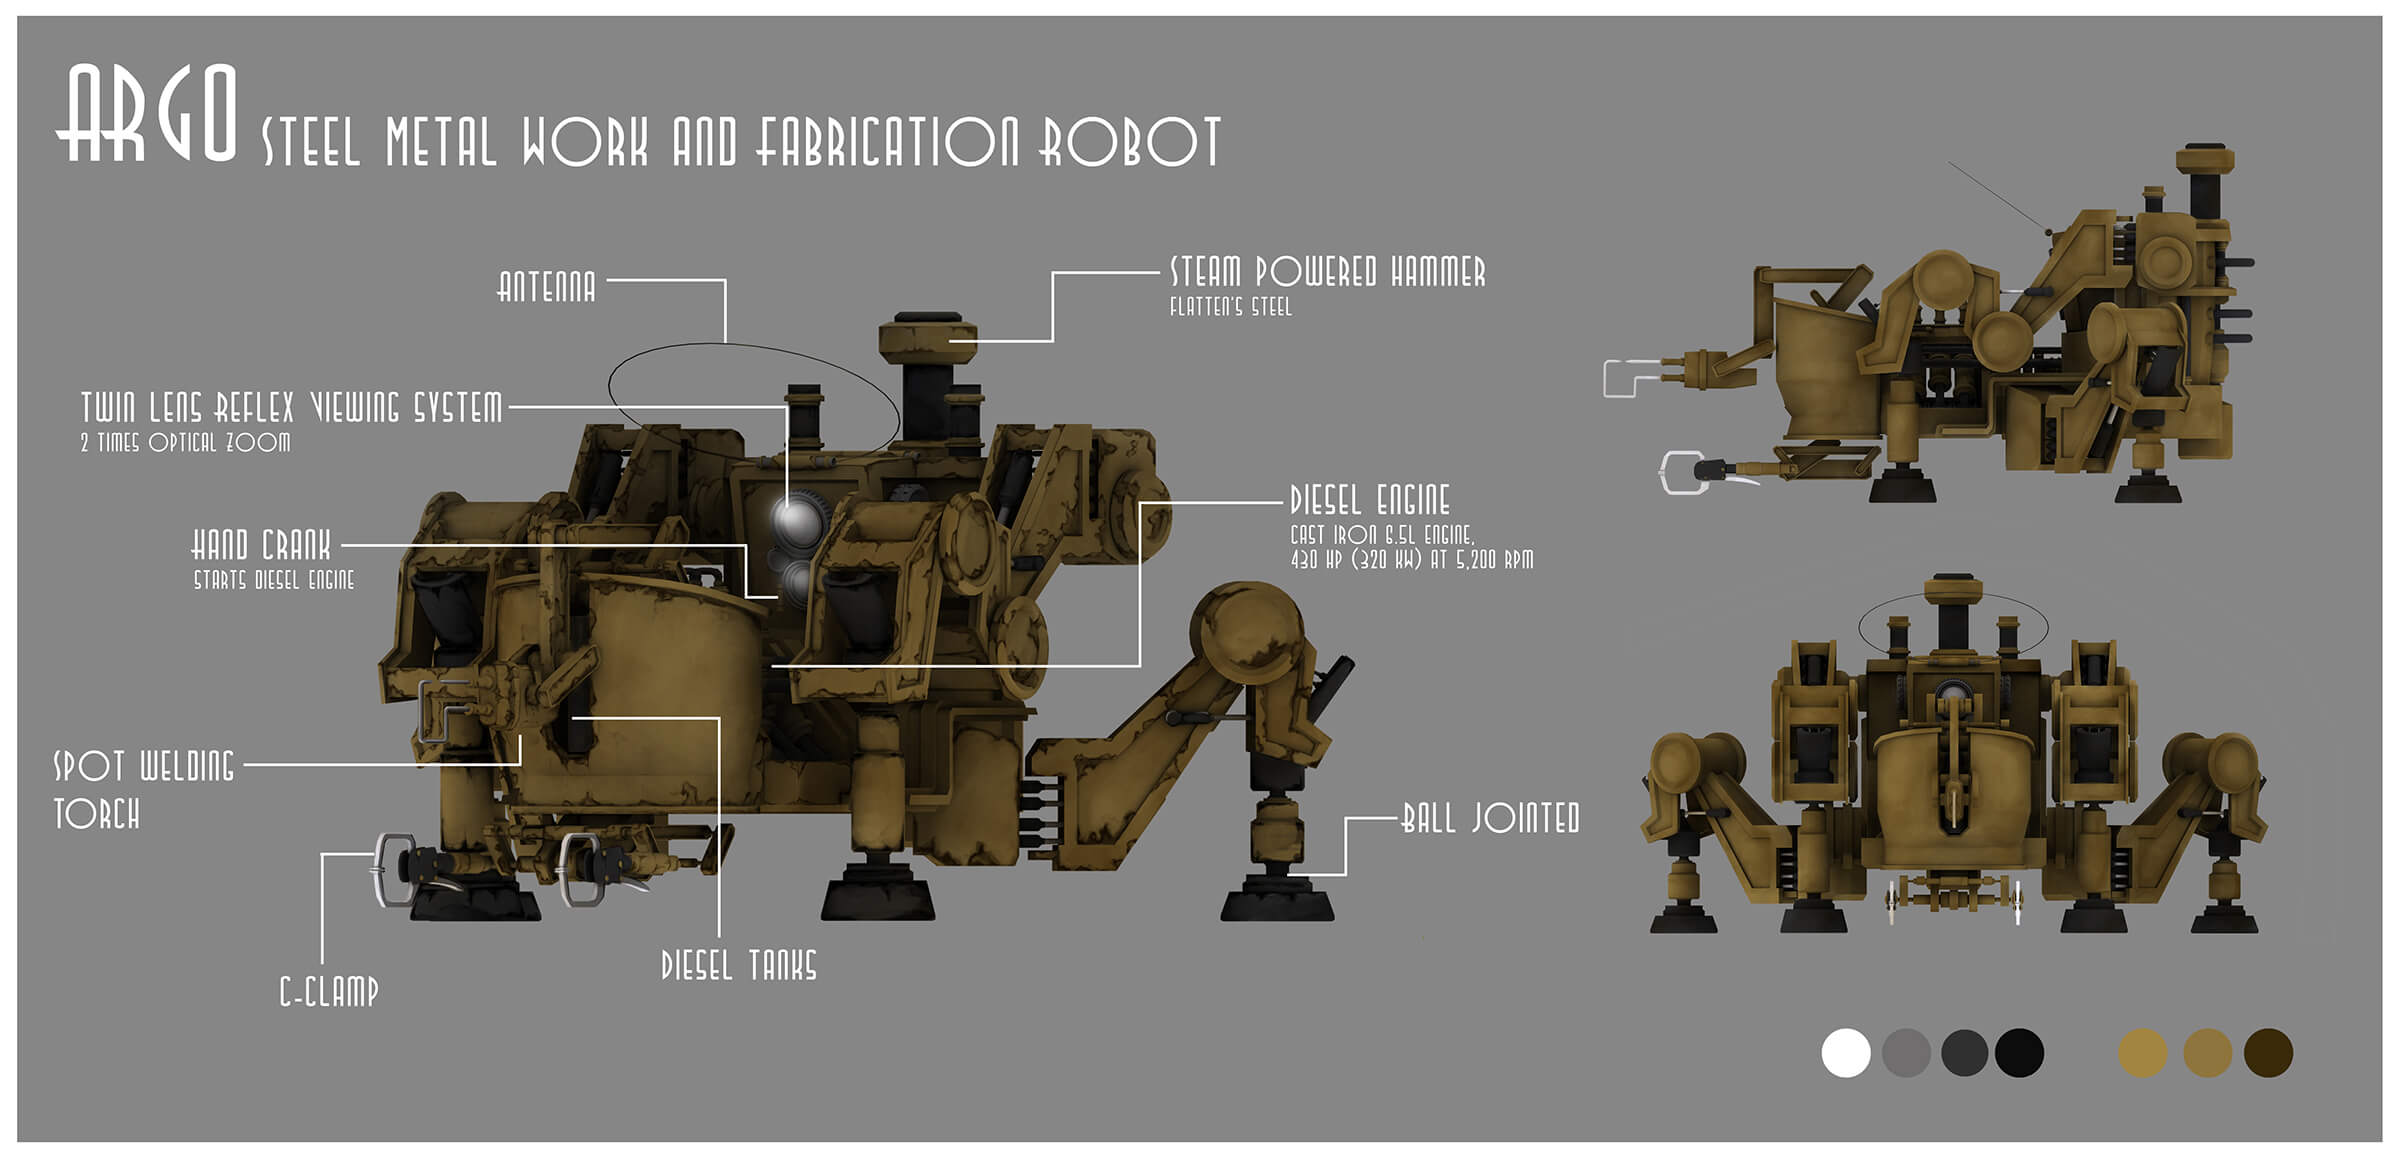 Concept art identifying components of a squat, beige mechanical vehicle with four legs and steam-powered hammer.